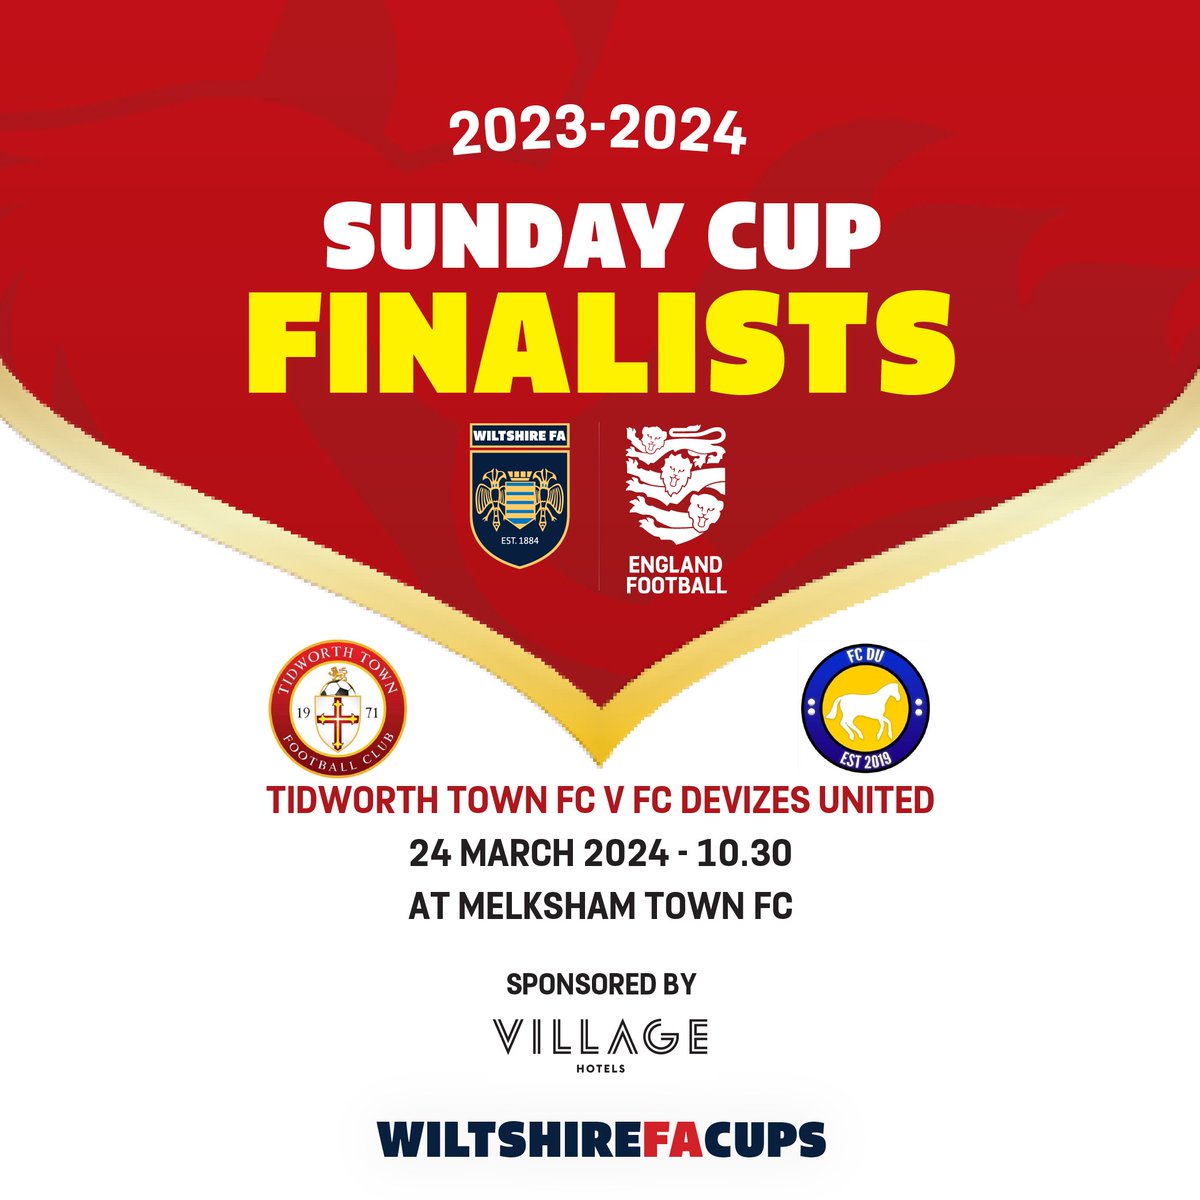 🤩 Wiltshire FA #SundayCup Finalists! 🆚 @TidworthTownFC1 v. @fcdevizesunited 📅24 March ⏰KO 10.30 🏟at @MELKSHAMTOWNFC wiltshirefa.com/cups-and-compe… Sponsored by Village Hotel Club (Swindon) #WiltshireFACups